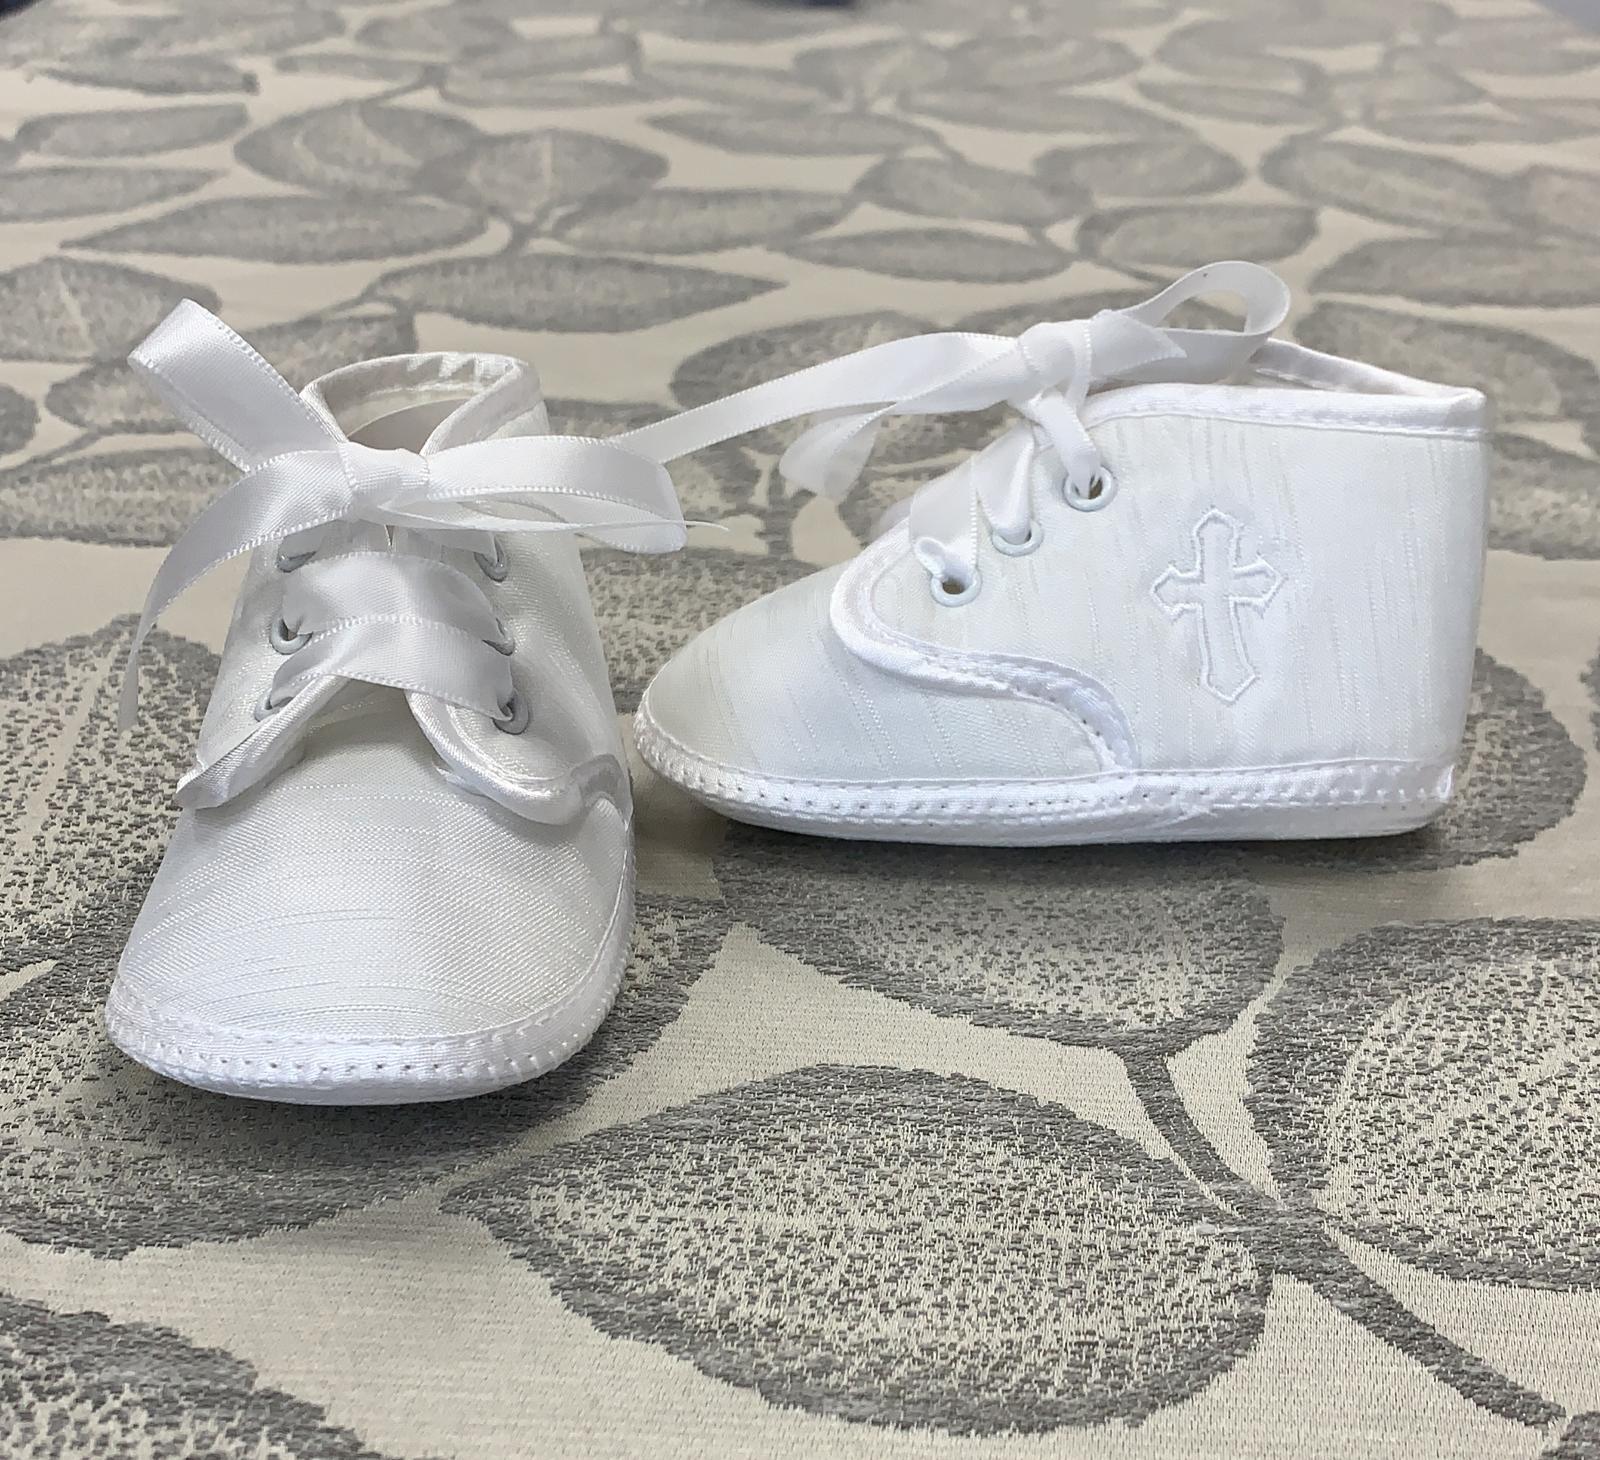 LITTLE CUTIE WHITE CHRISTENING SHOES WITH CROSS